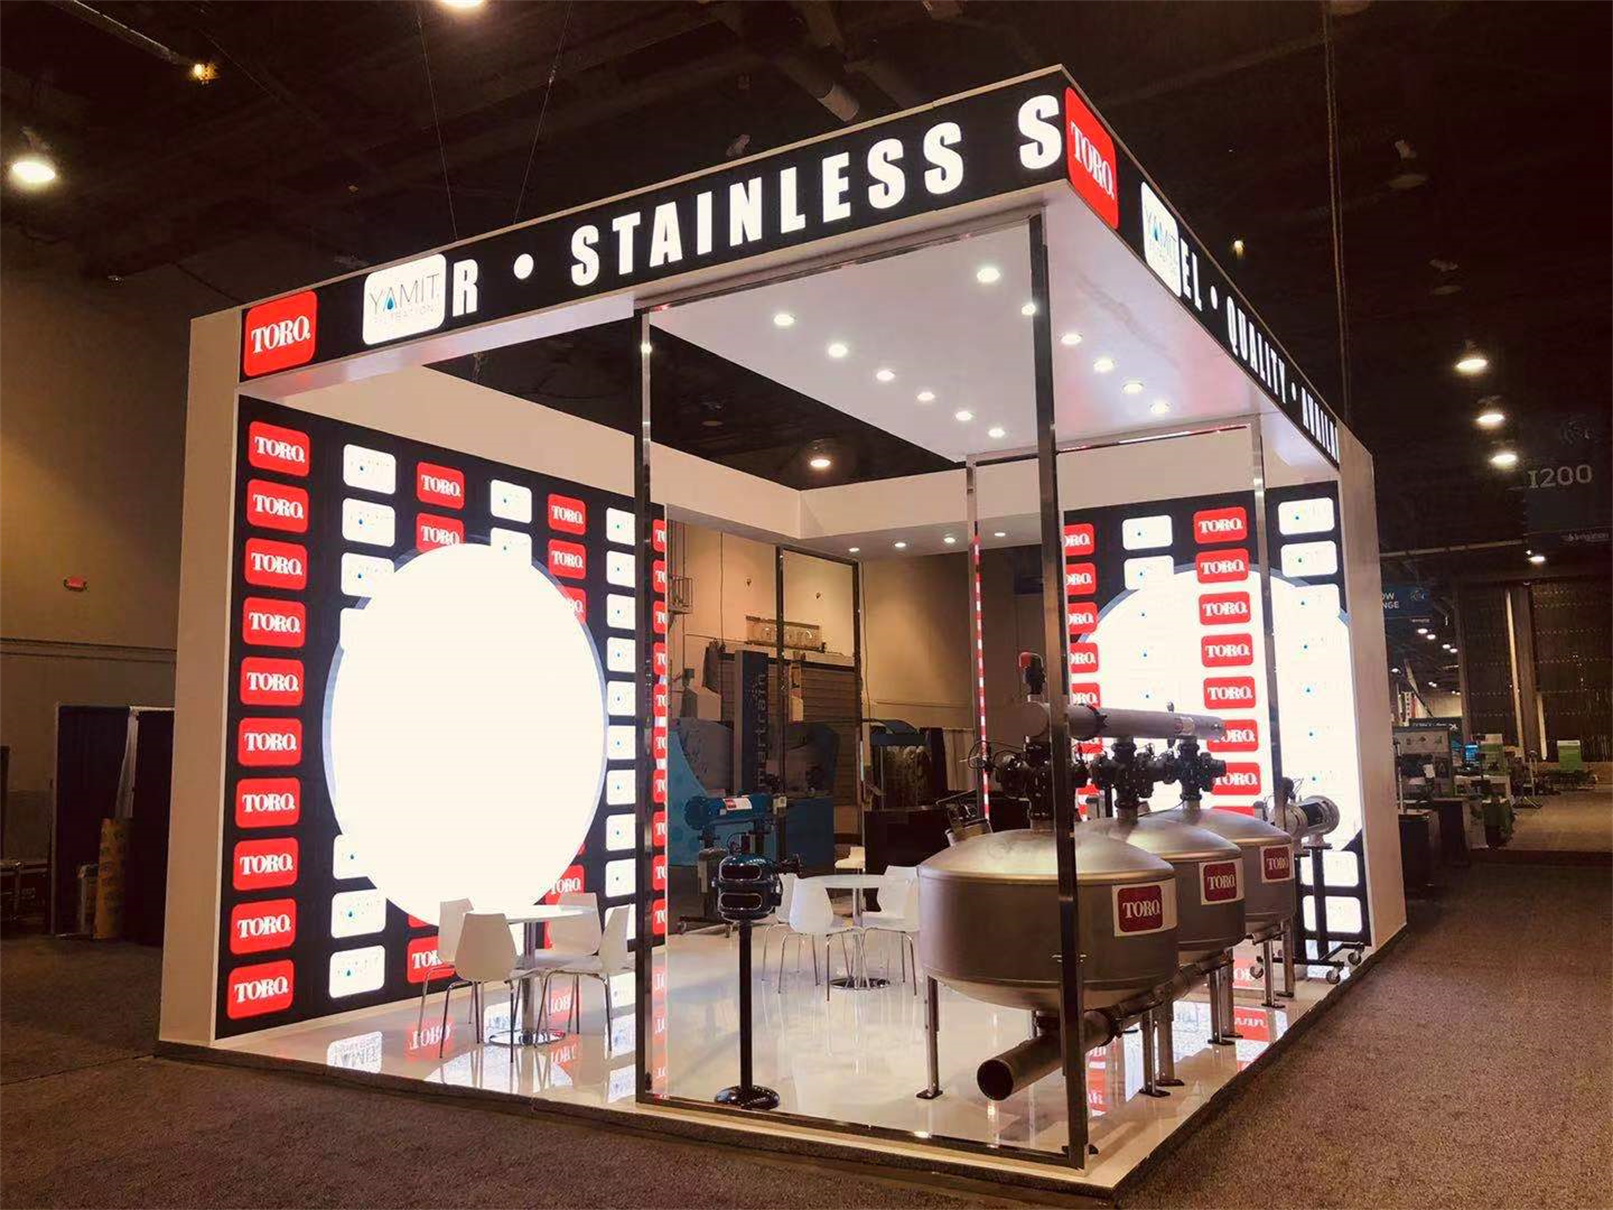 6 Ideas To Attract Visitors To Your Trade Show Booth